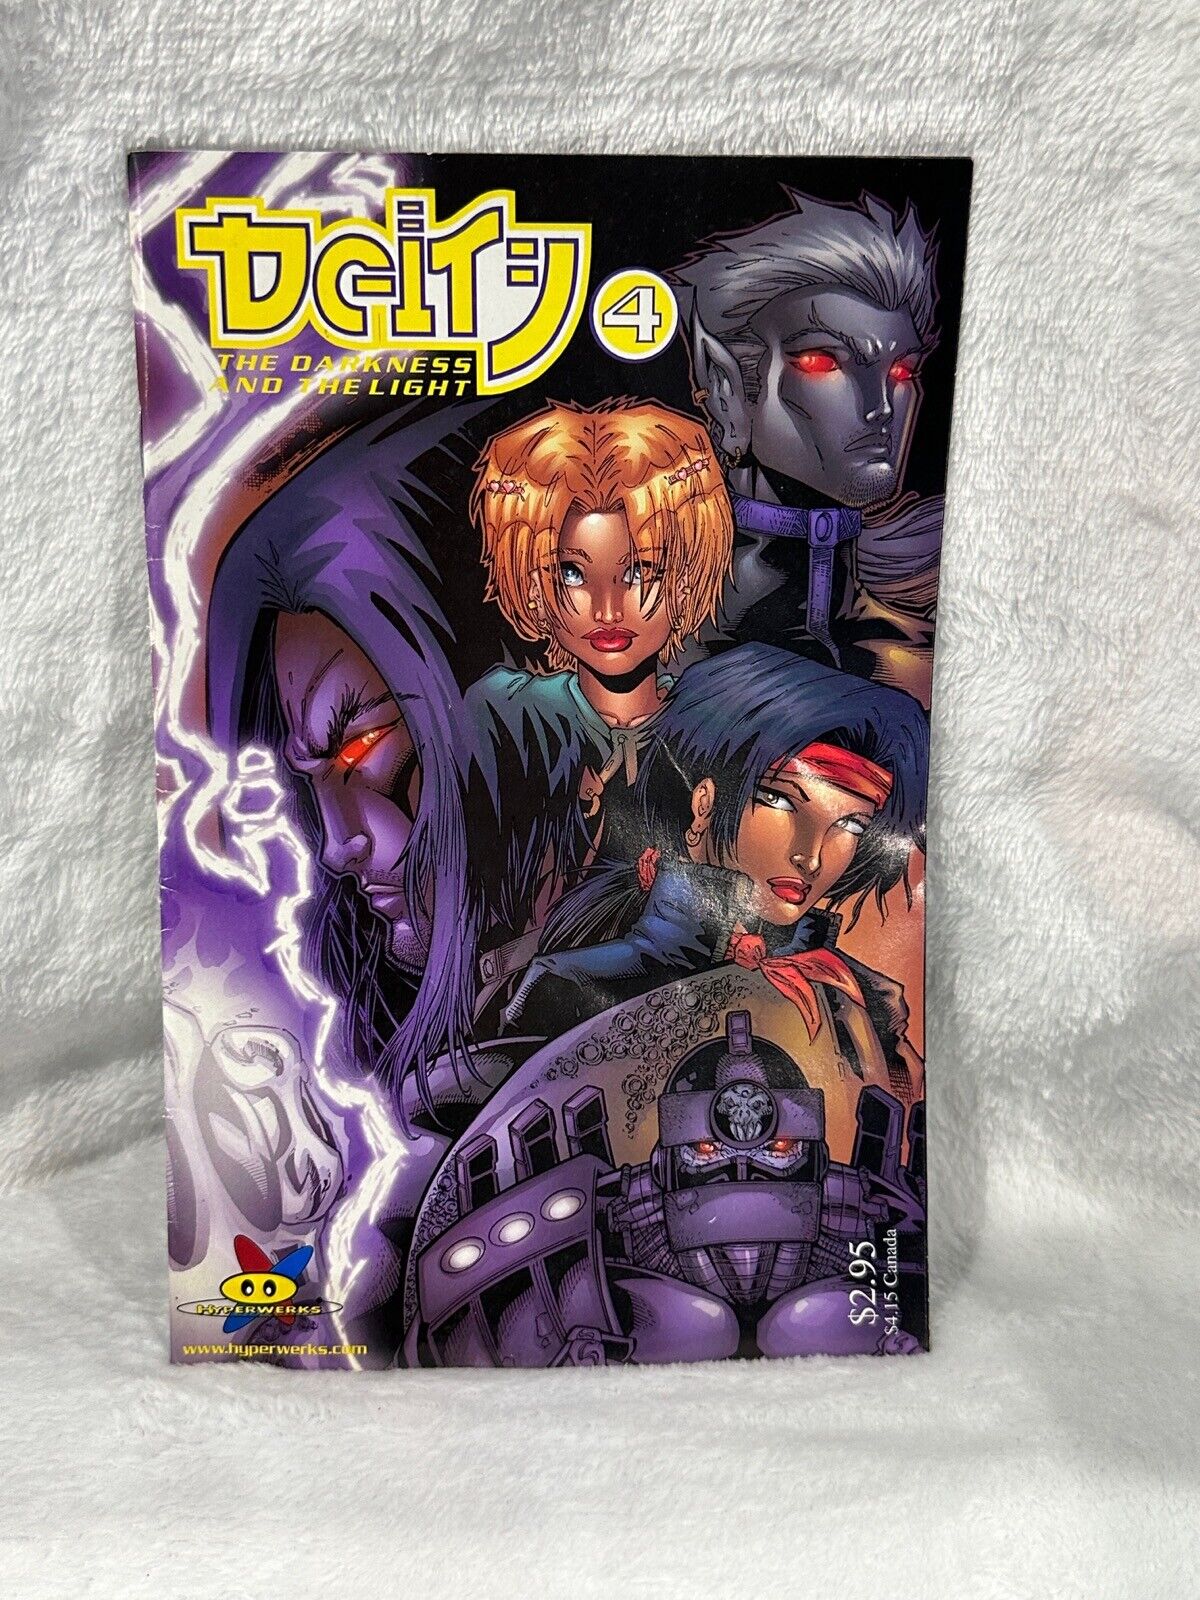 Deity The Darkness And The Light #4 1999 Hyperwerks Comics